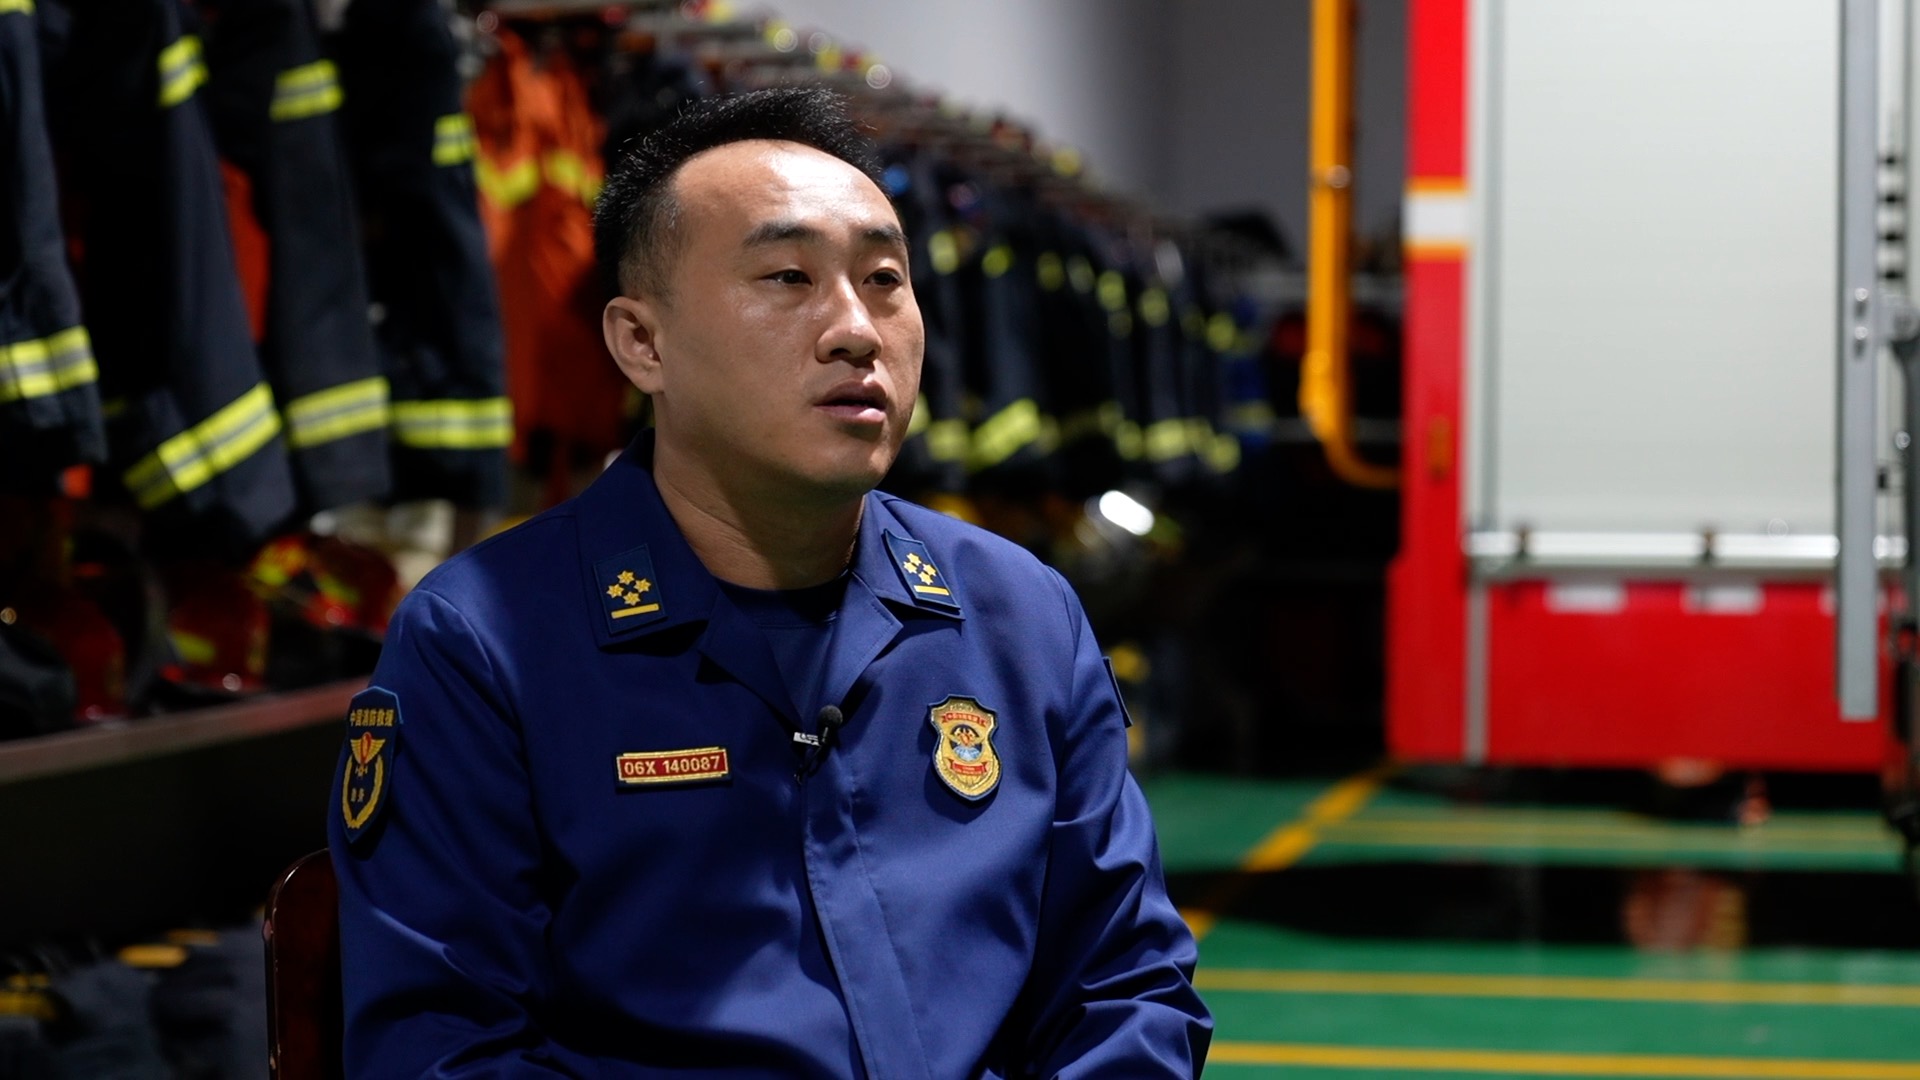 For serving the people wholeheartedly is the motto of the CPC, Gao has led by example: For 21 years, he has been at the front line of over 3,800 fire accidents. /CGTN